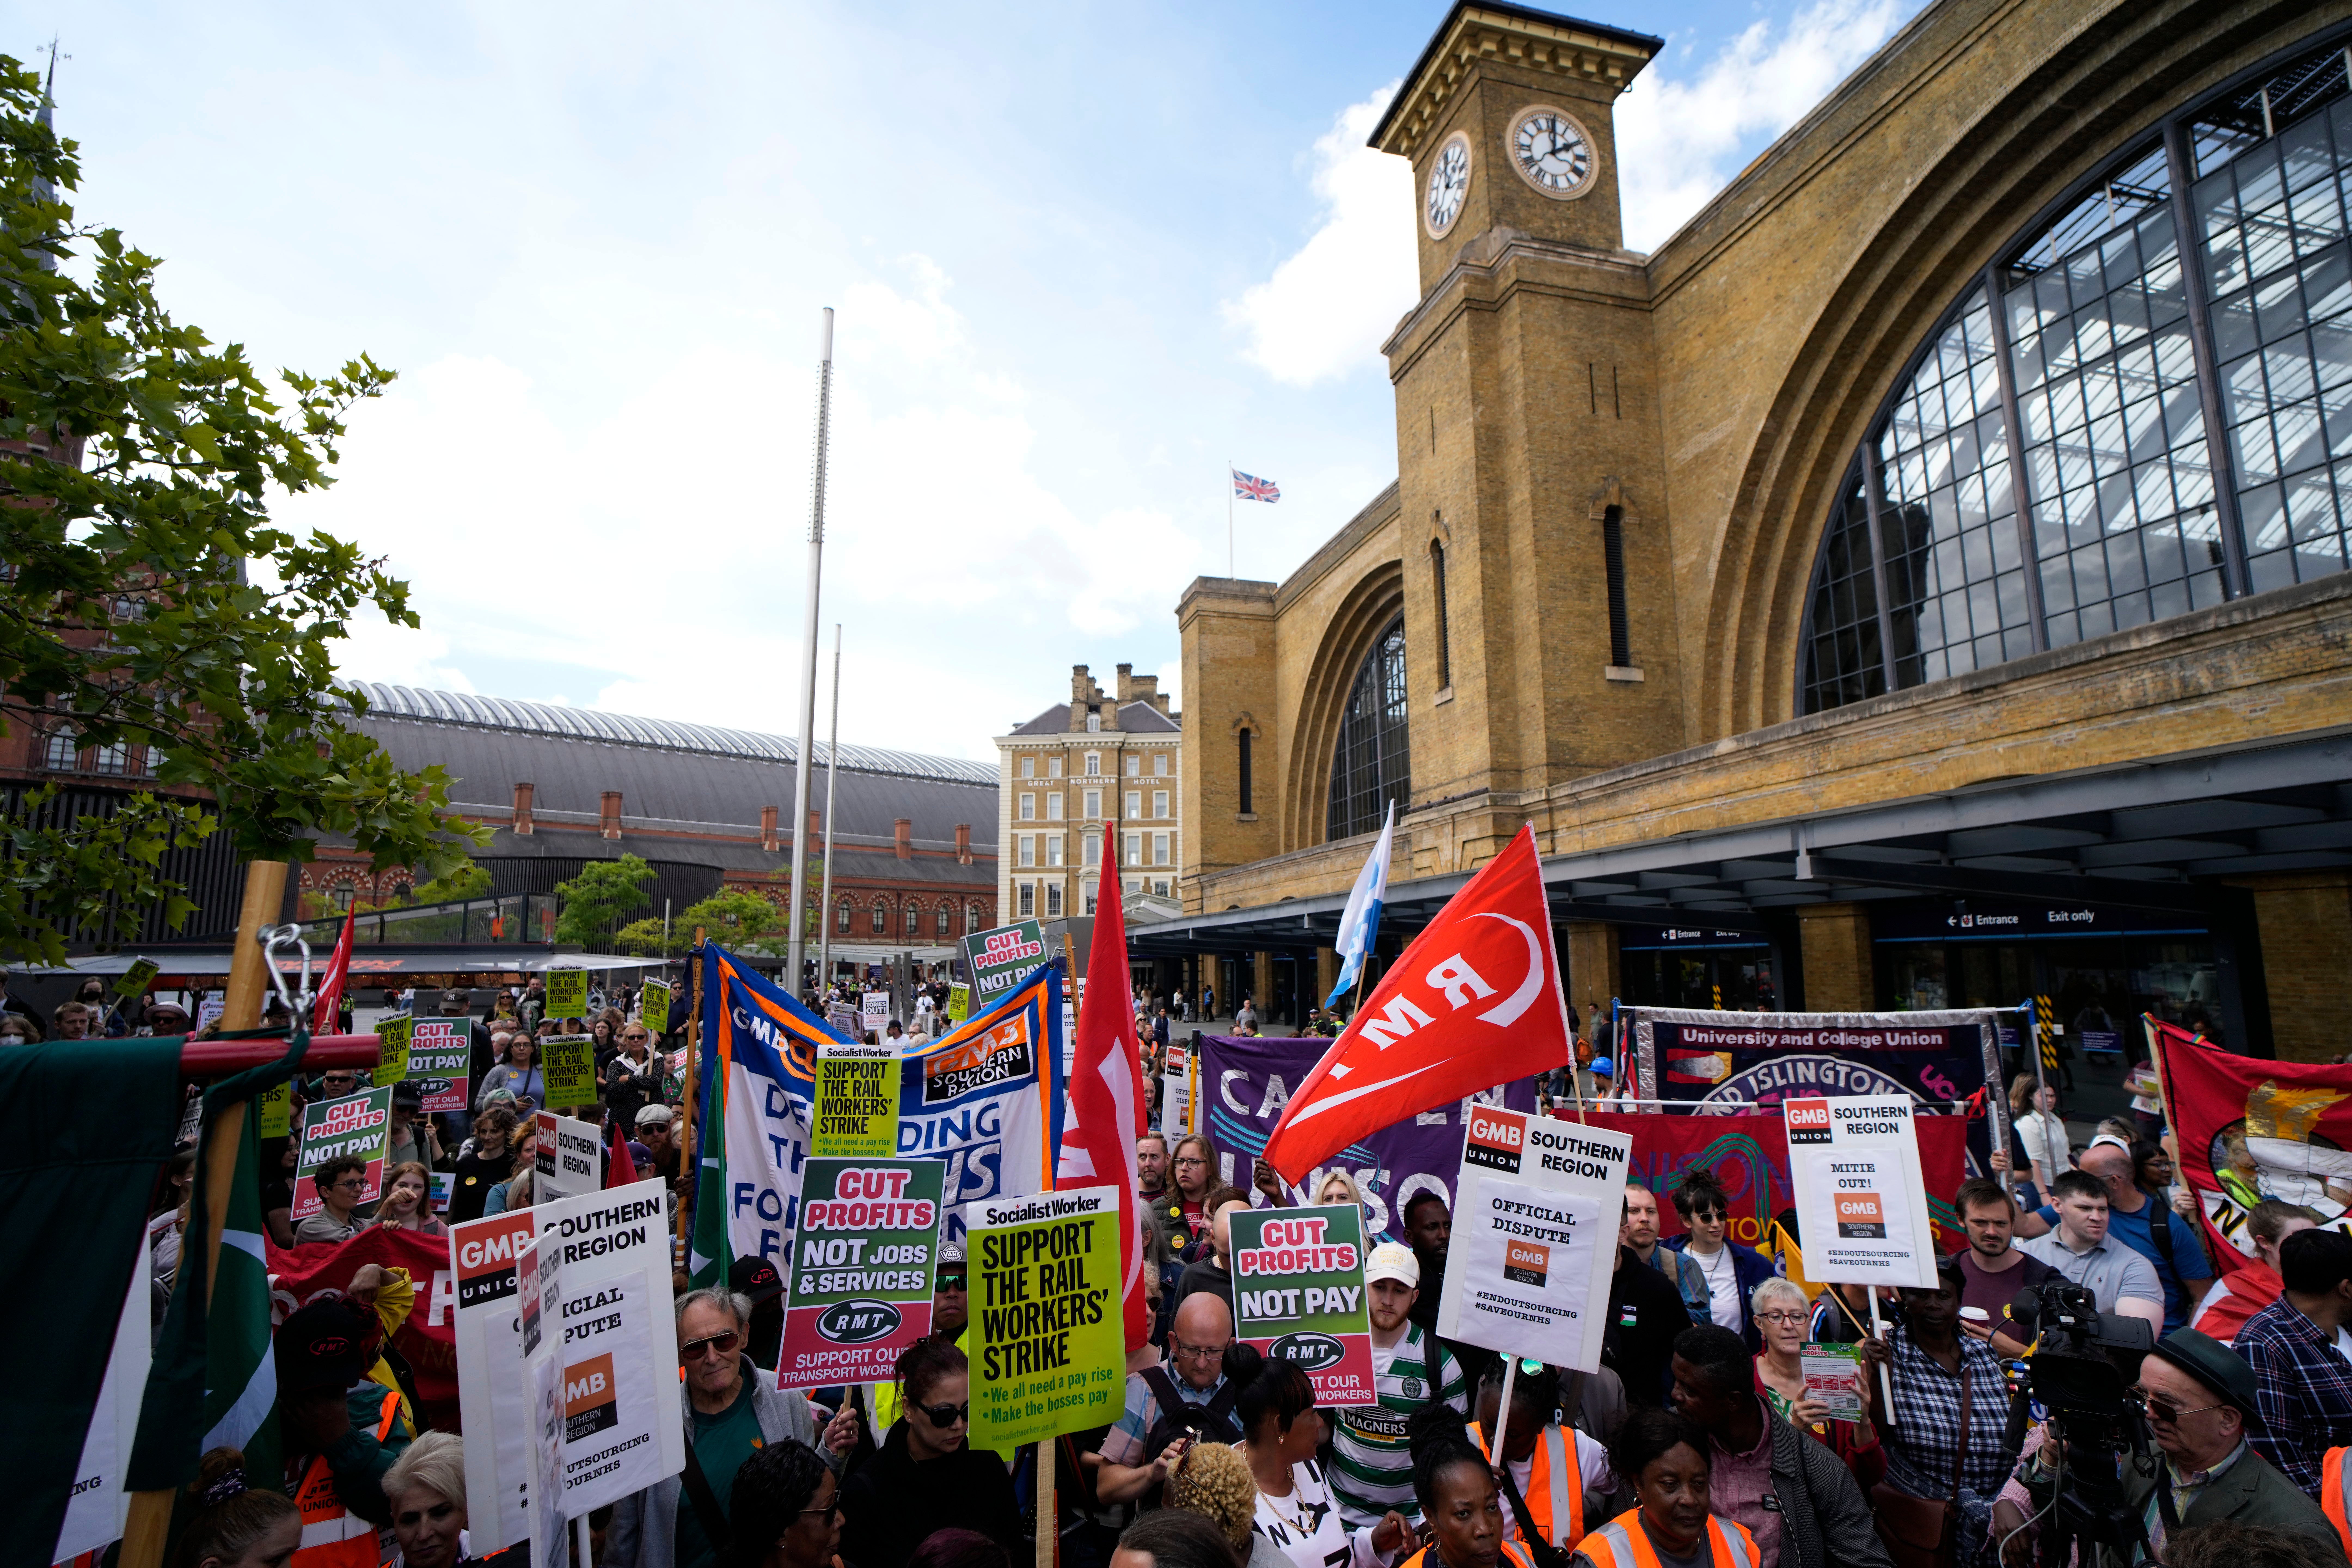 The RMT union has called off a rail strike but action is still expected on the London underground